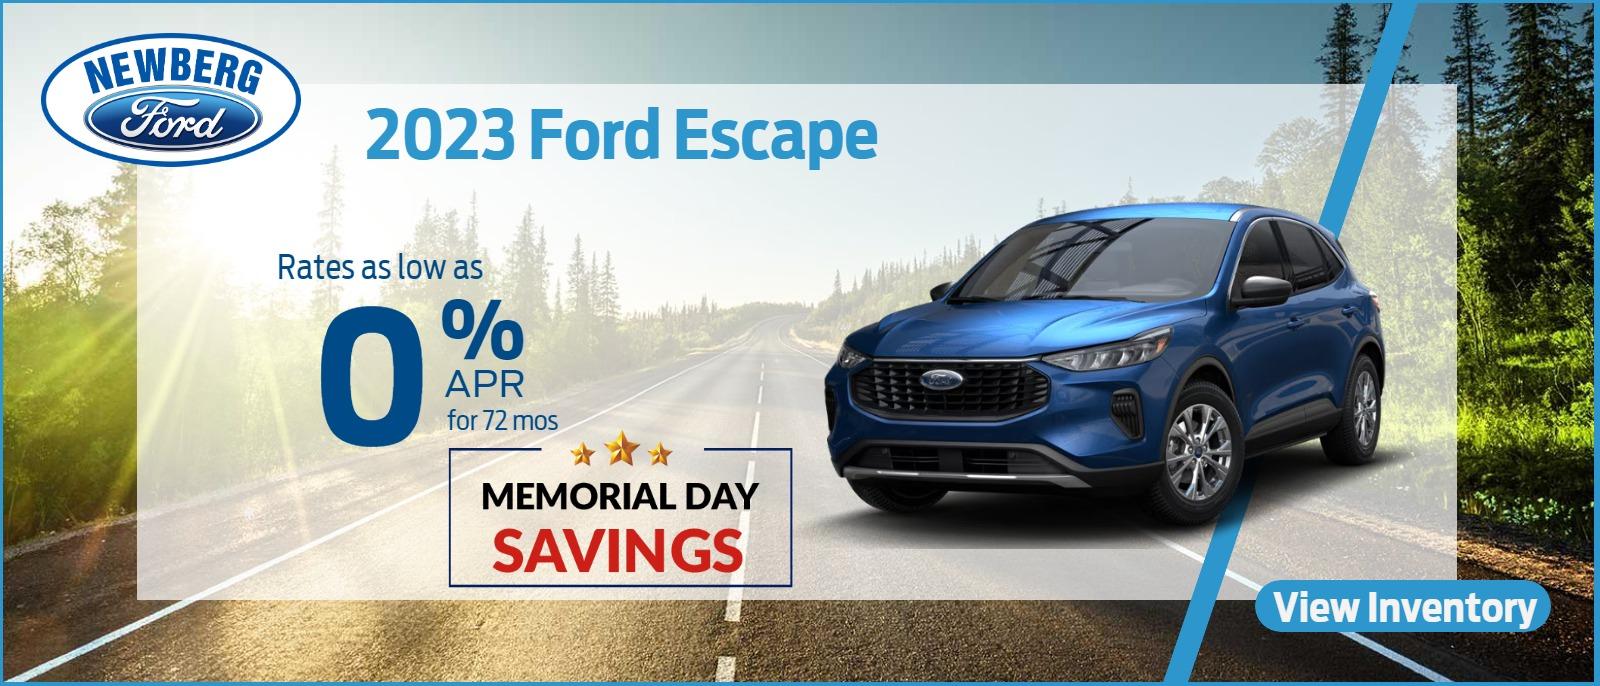 0% APR FOR UP TO 72 MONTHS ON NEW 2023 ESCAPE FROM NEWBERG FORD